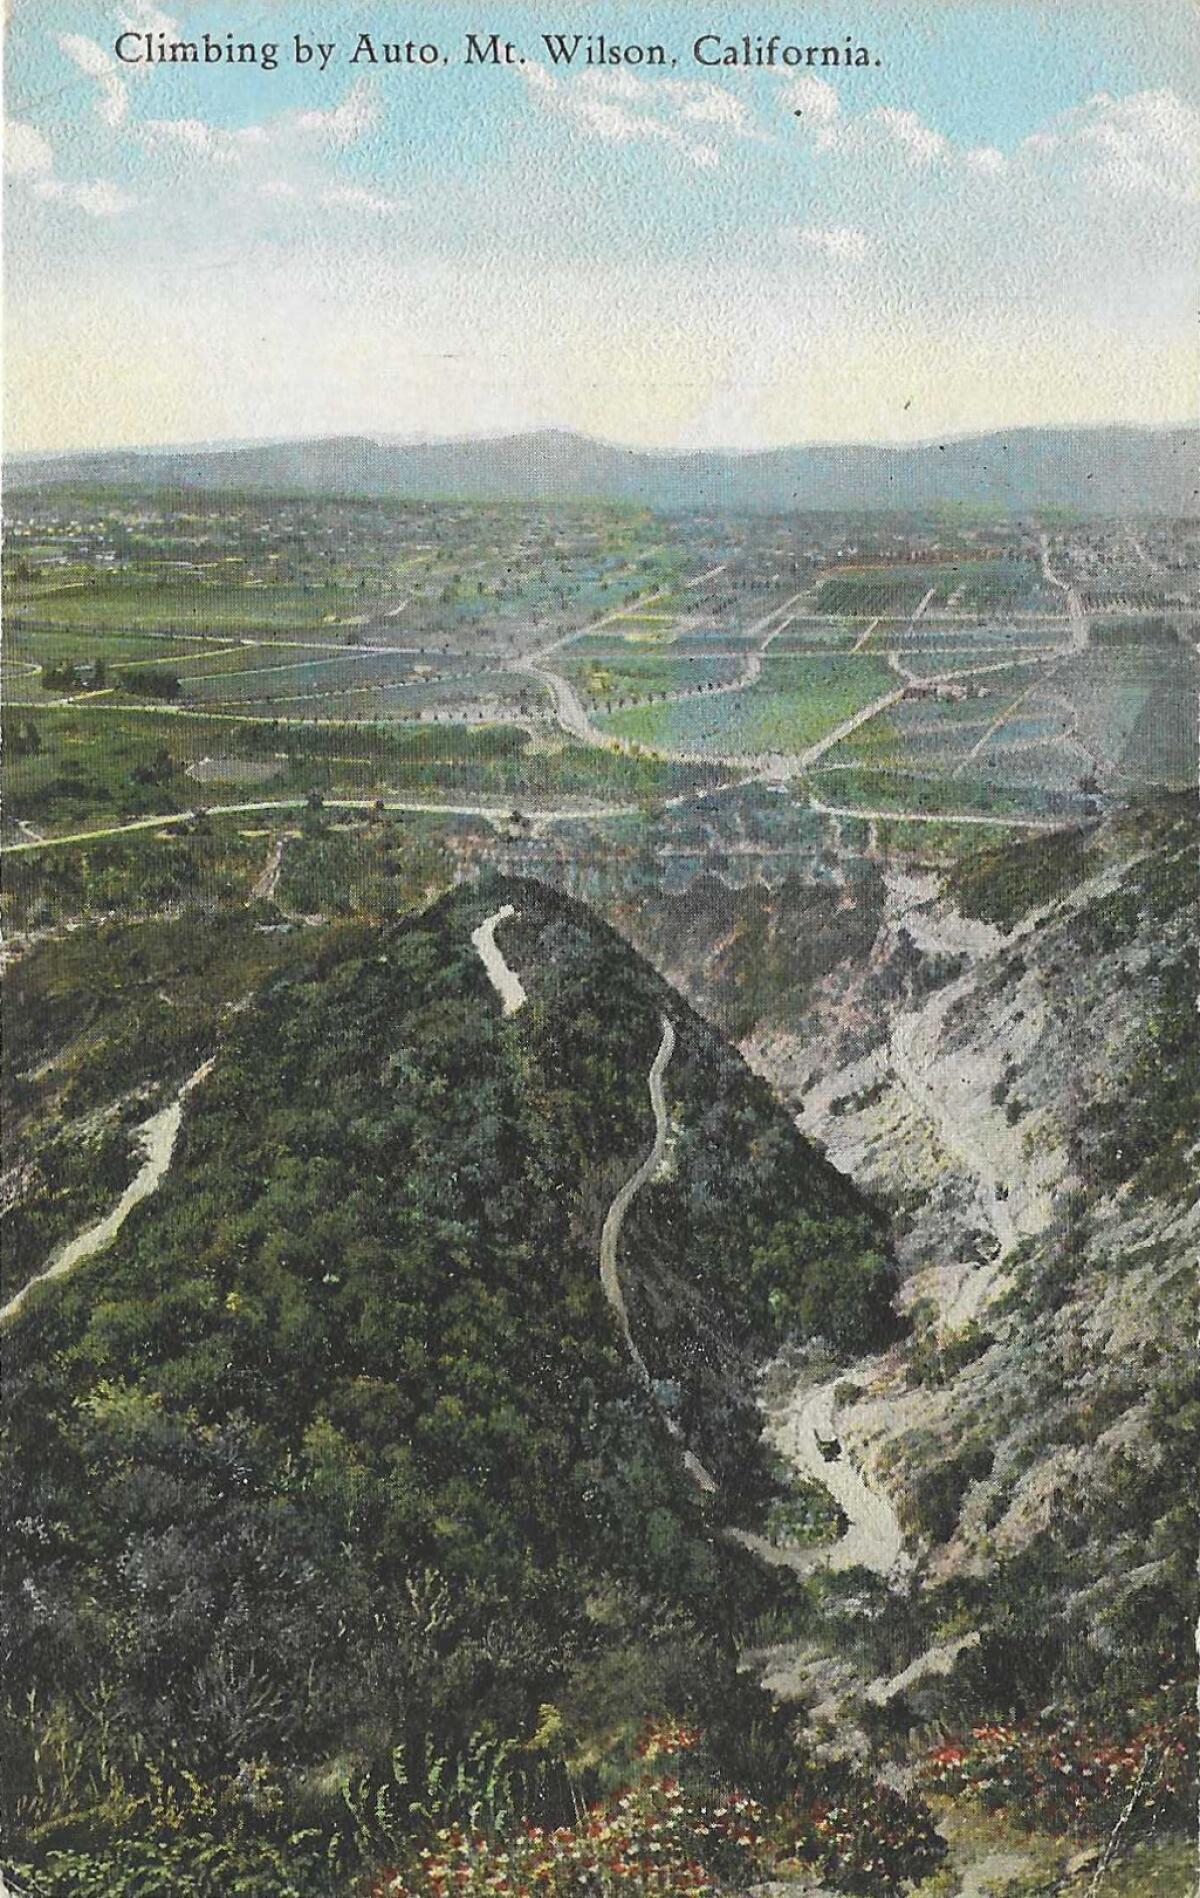 A vintage postcard looks at Los Angeles from the San Gabriel Mountains and reads "Climbing by Auto, Mt. Wilson, California"